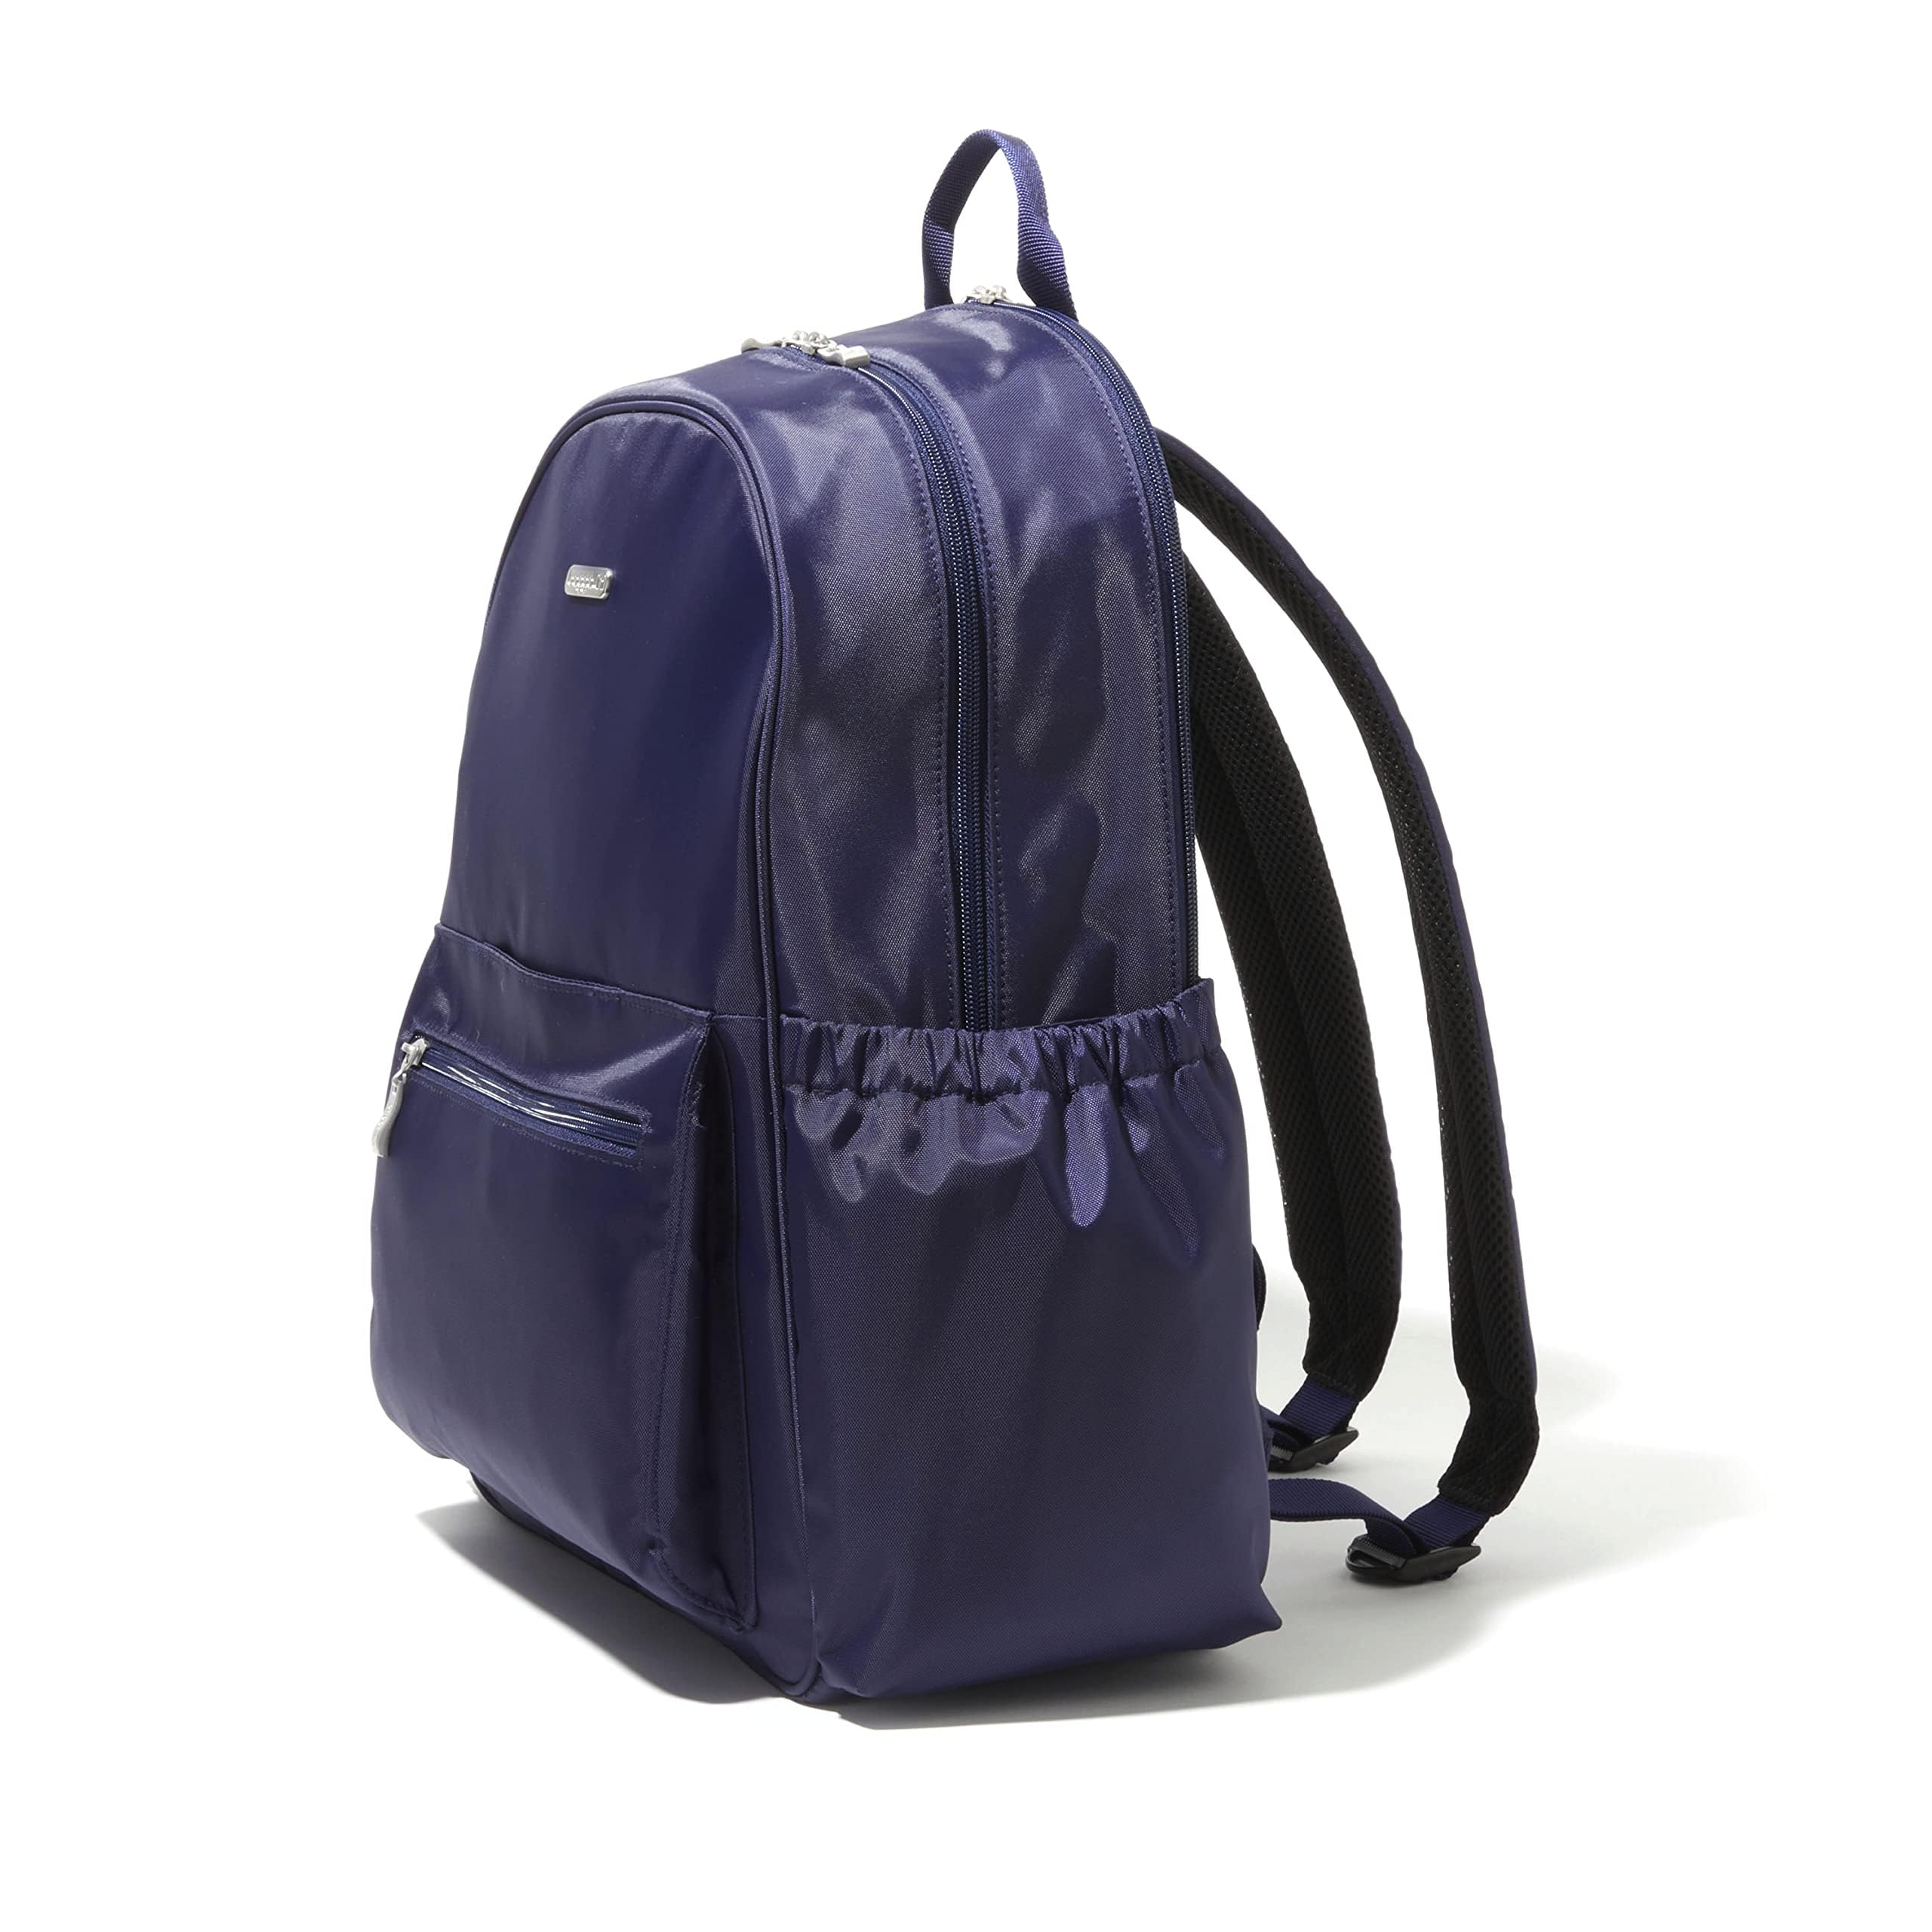 Baggallini Womens Essential Laptop Backpack, Cadet Navy